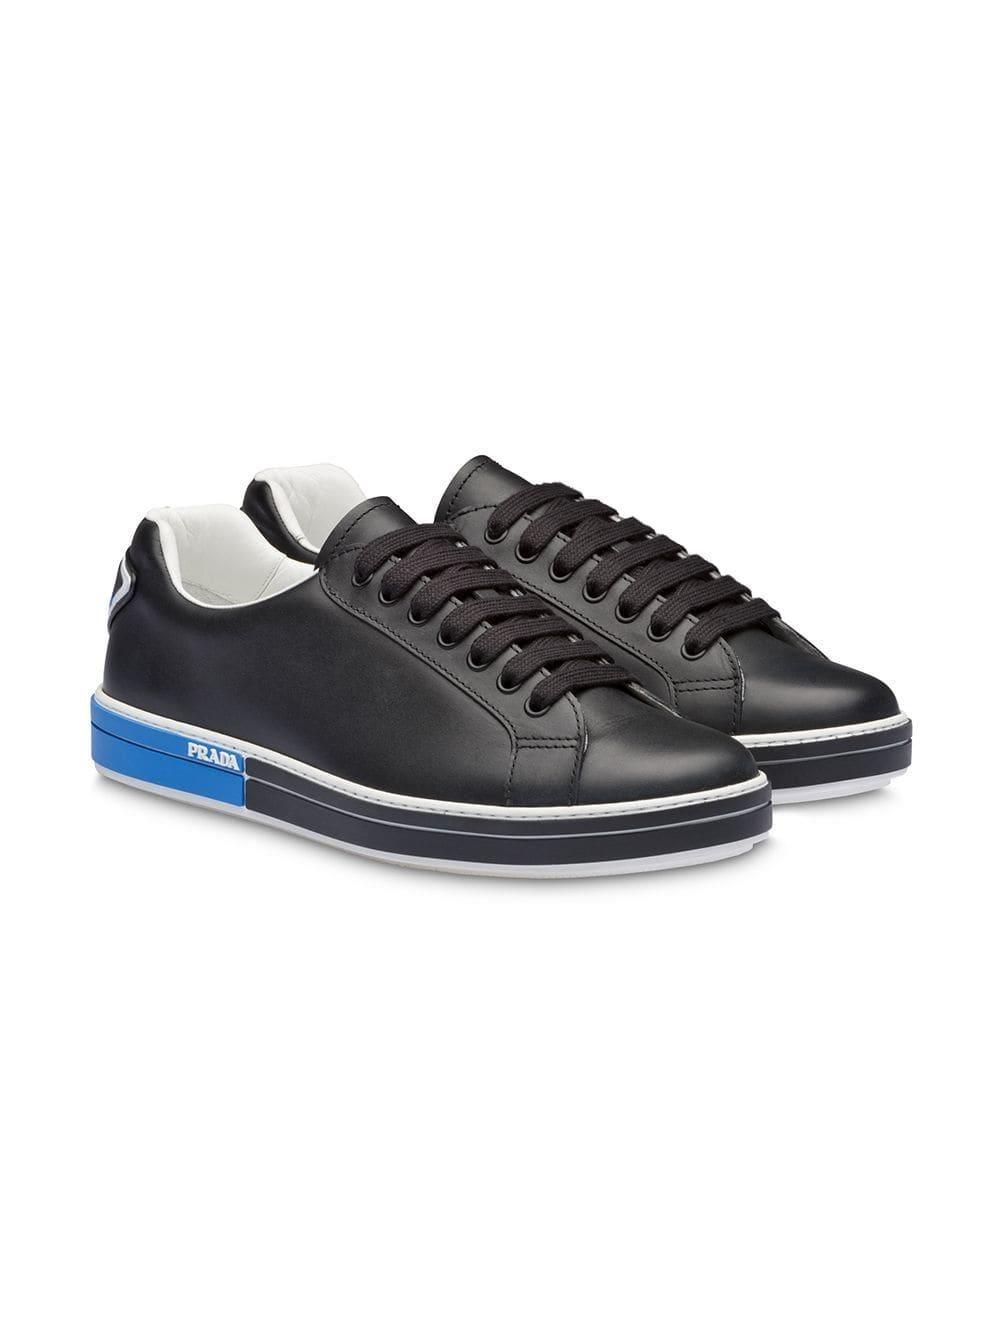 Blue and Black with Triangle Logo - Lyst - Prada Rubber Triangle Logo Sneakers in Black for Men